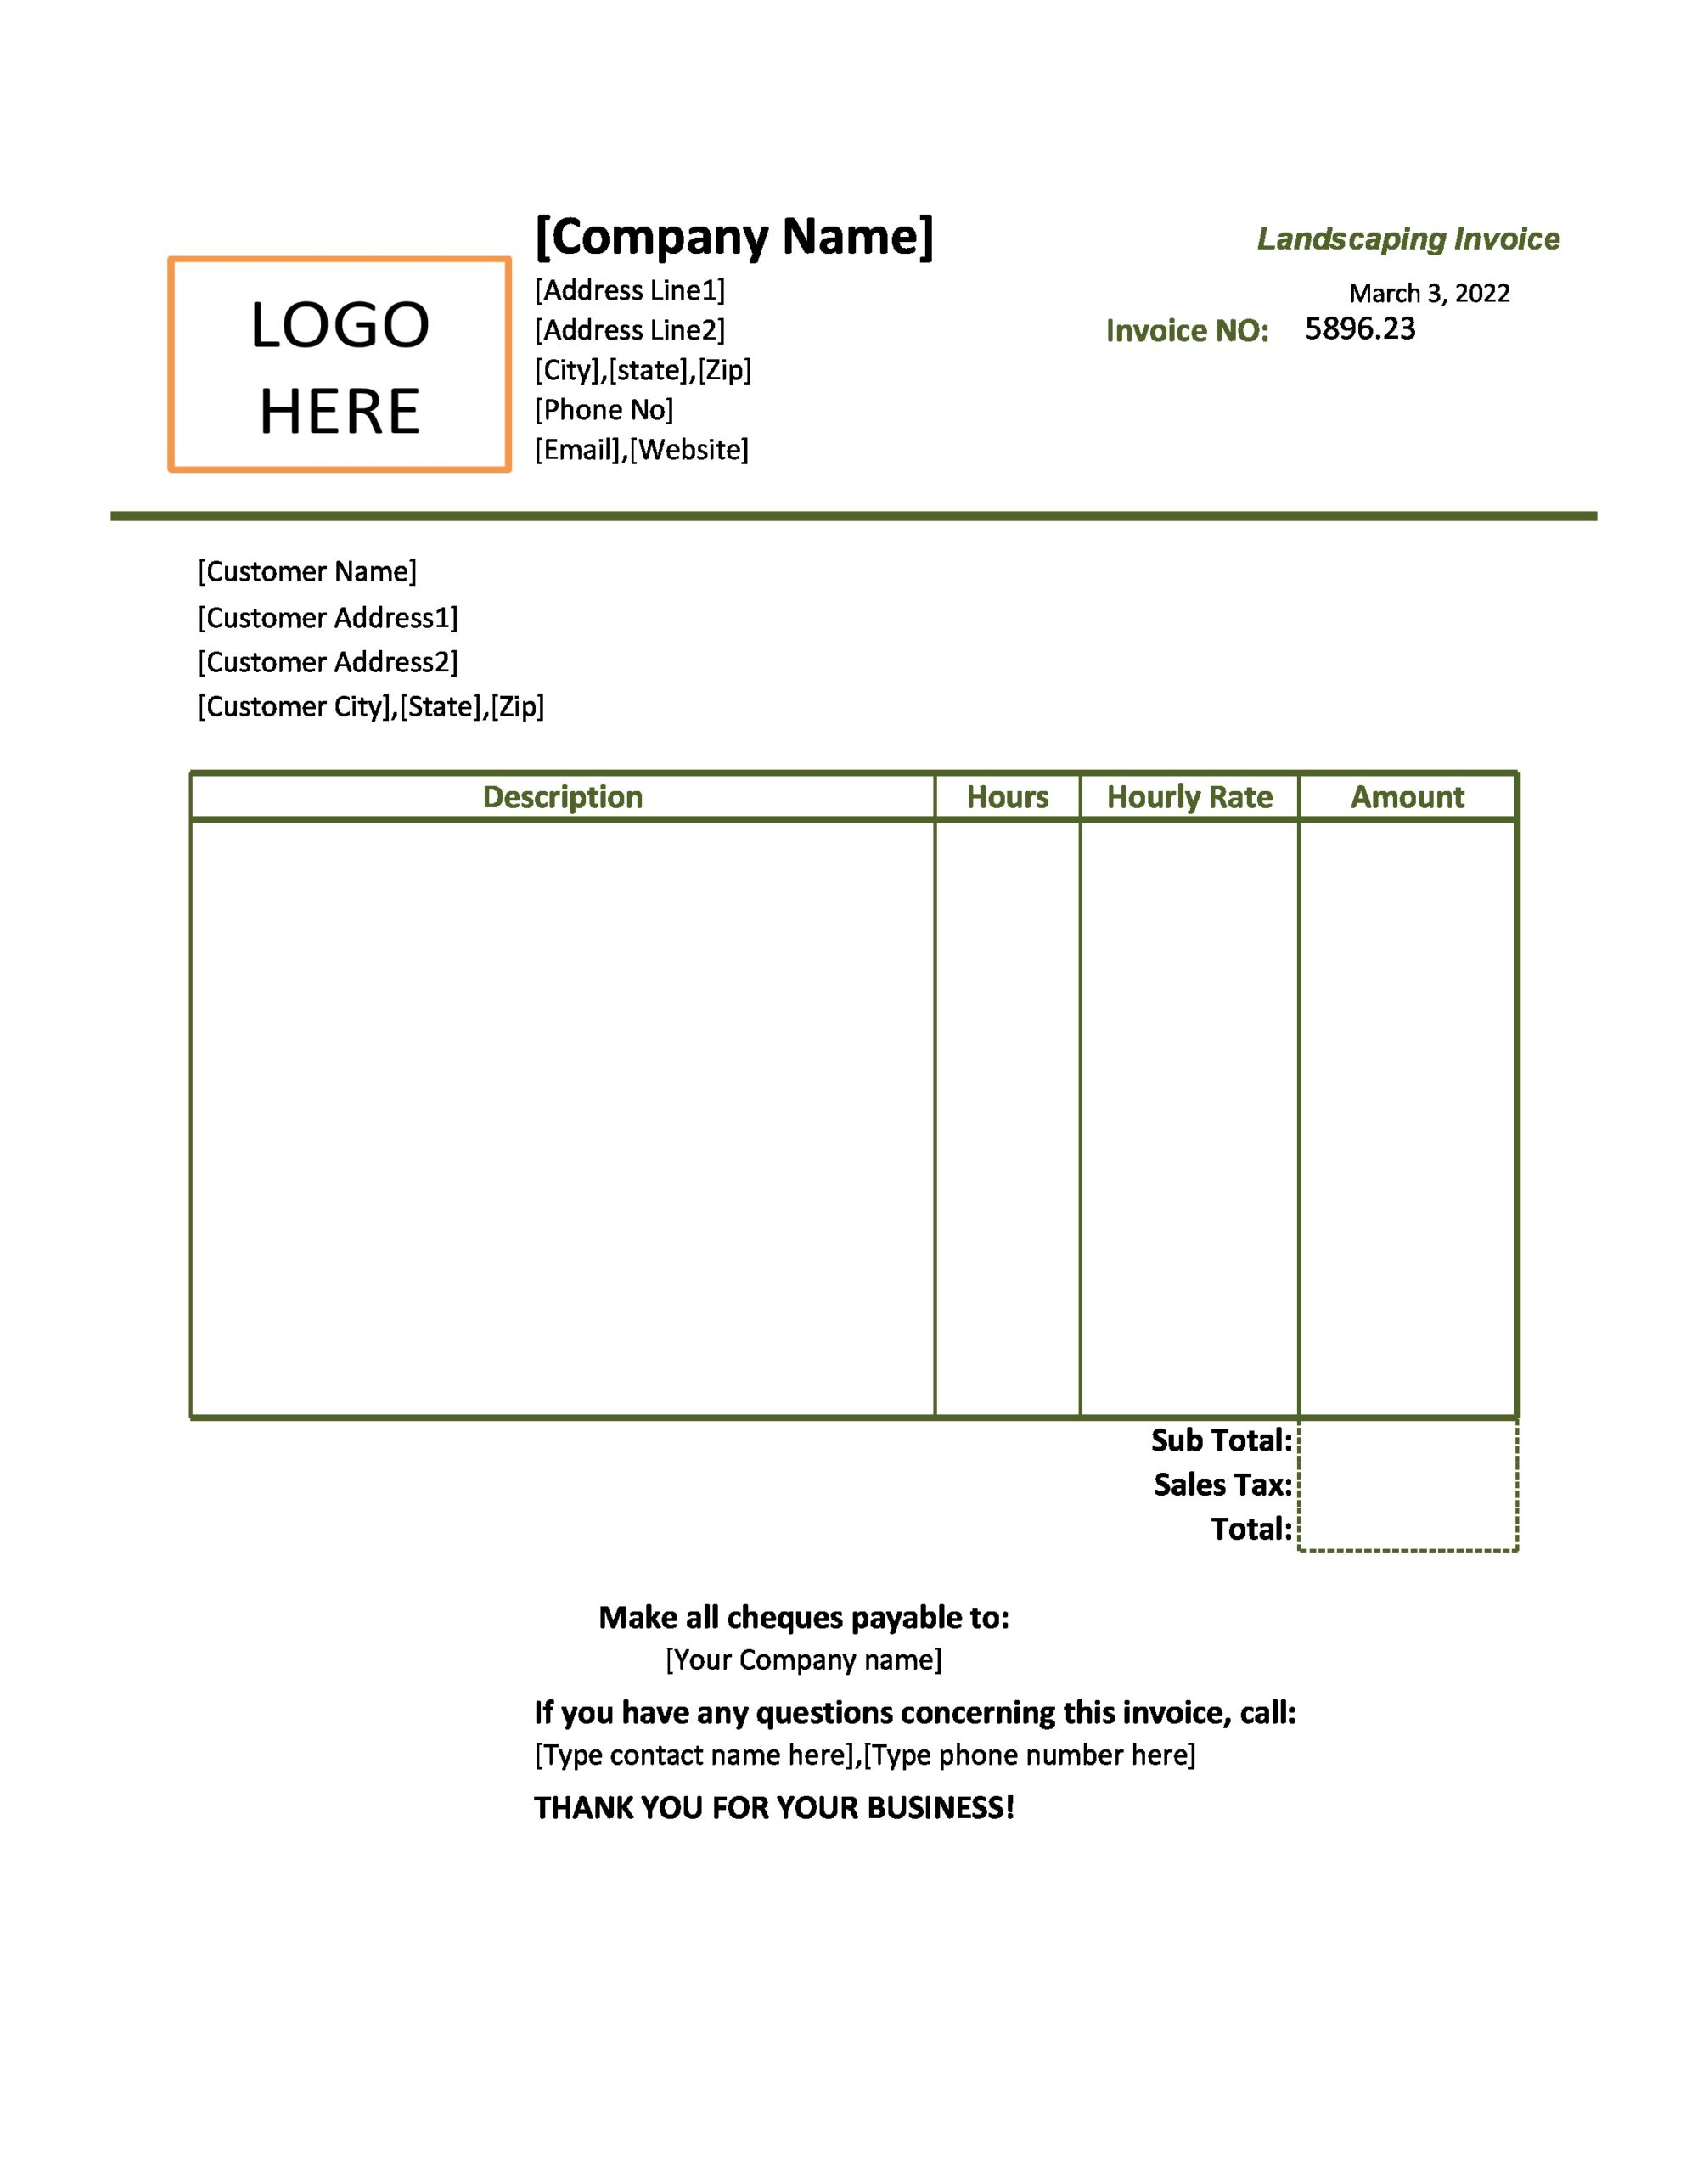 Free landscaping invoice 30